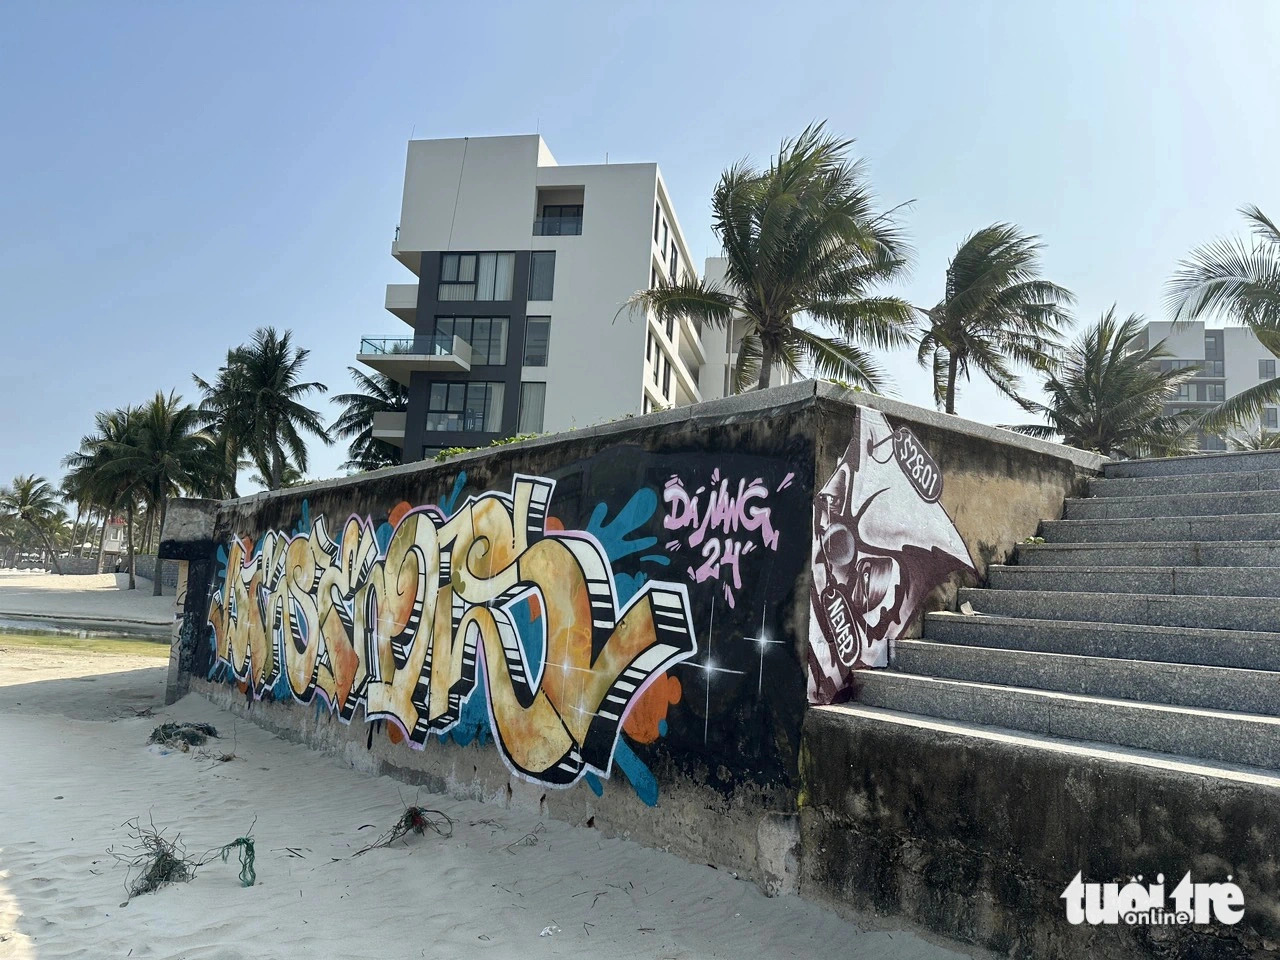 An embankment is full of graffiti at Son Thuy Beach in Ngu Hanh Son District, Da Nang City, central Vietnam. Photo: Tuoi Tre